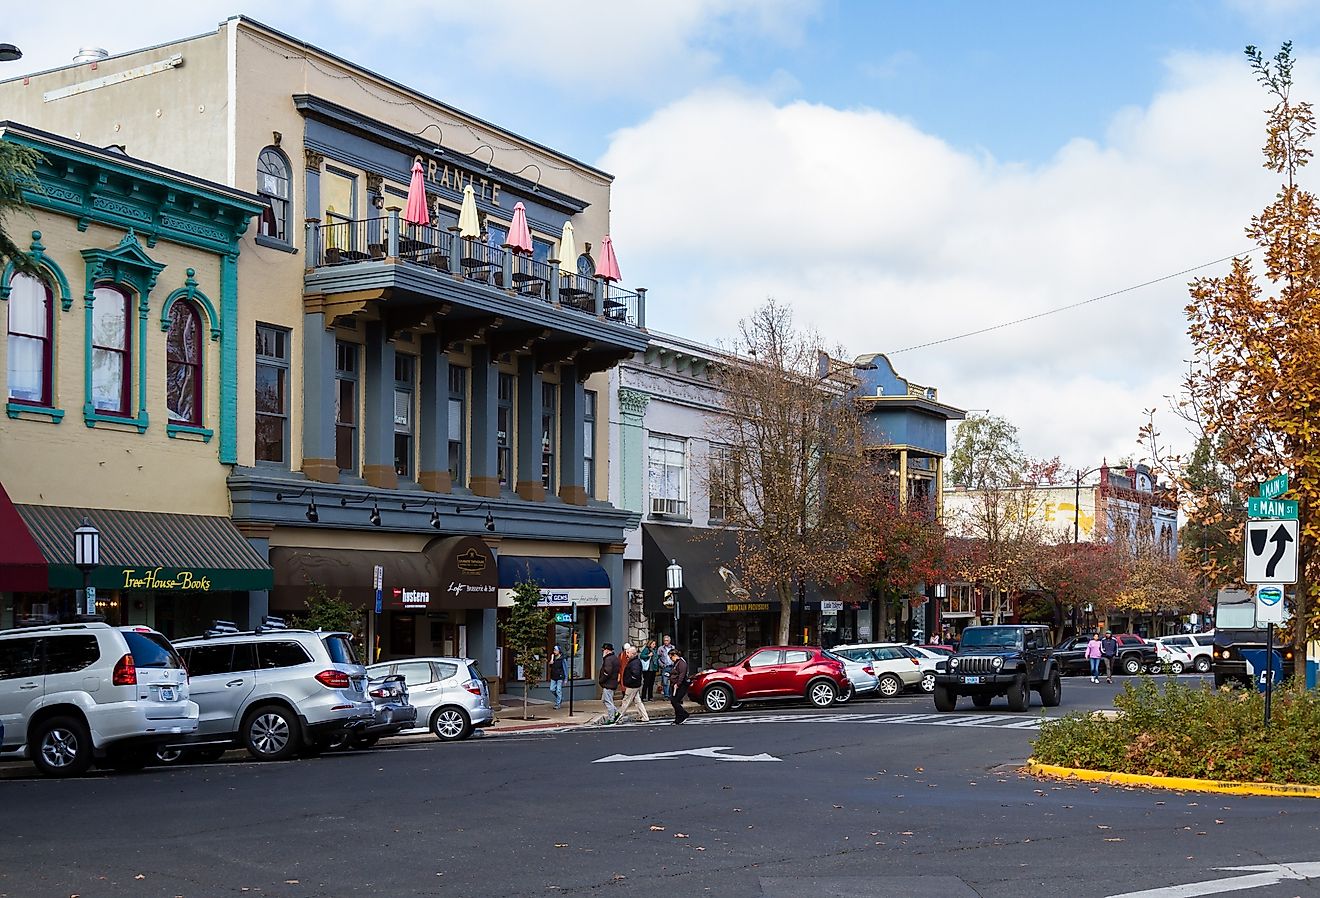 Downtown streets in Ashland, Oregon. Image credit Nature's Charm via Shutterstock